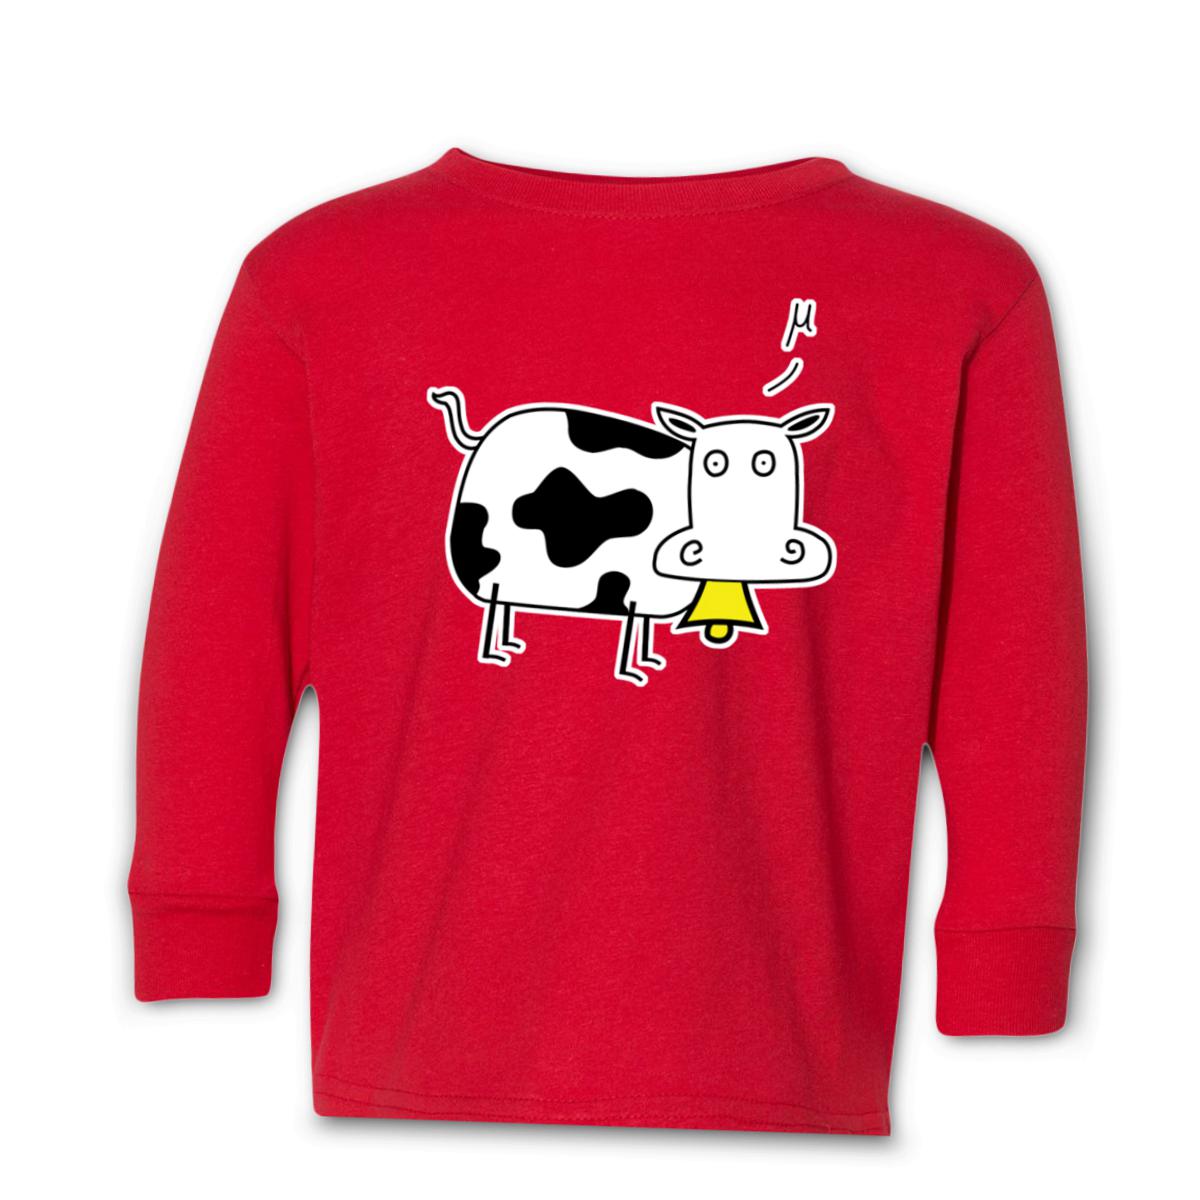 Mu Cow Toddler Long Sleeve Tee 56T red